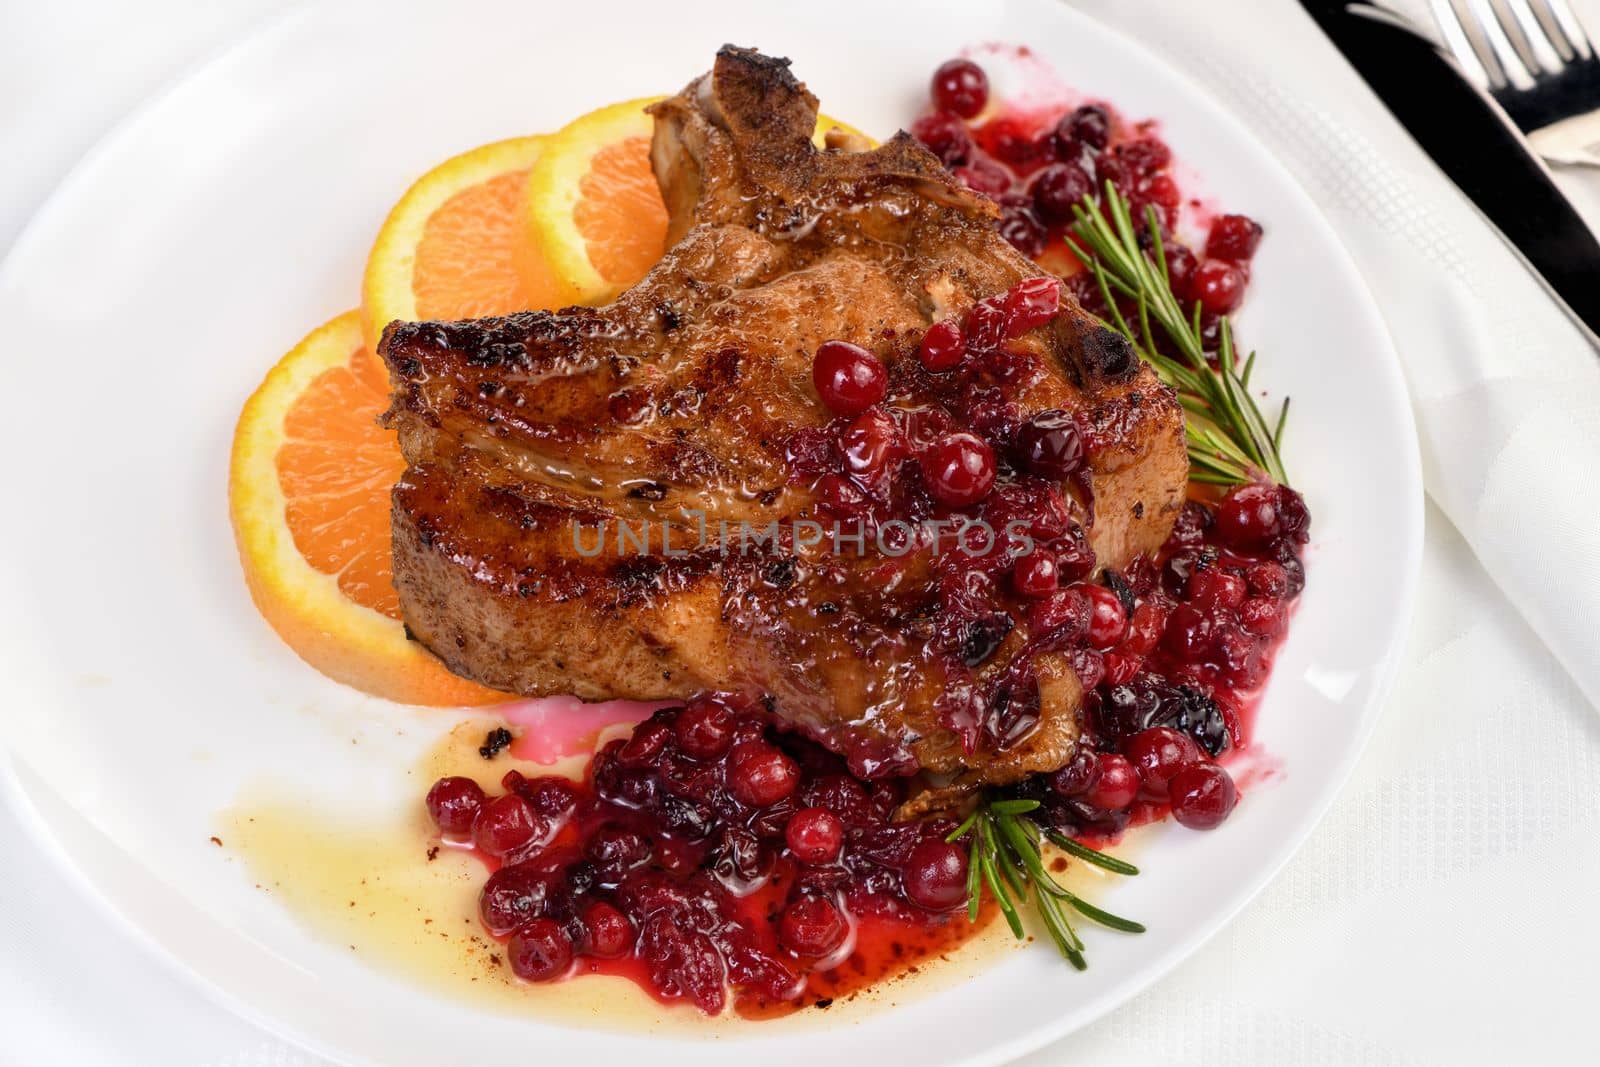 Cranberry pork chops by Apolonia